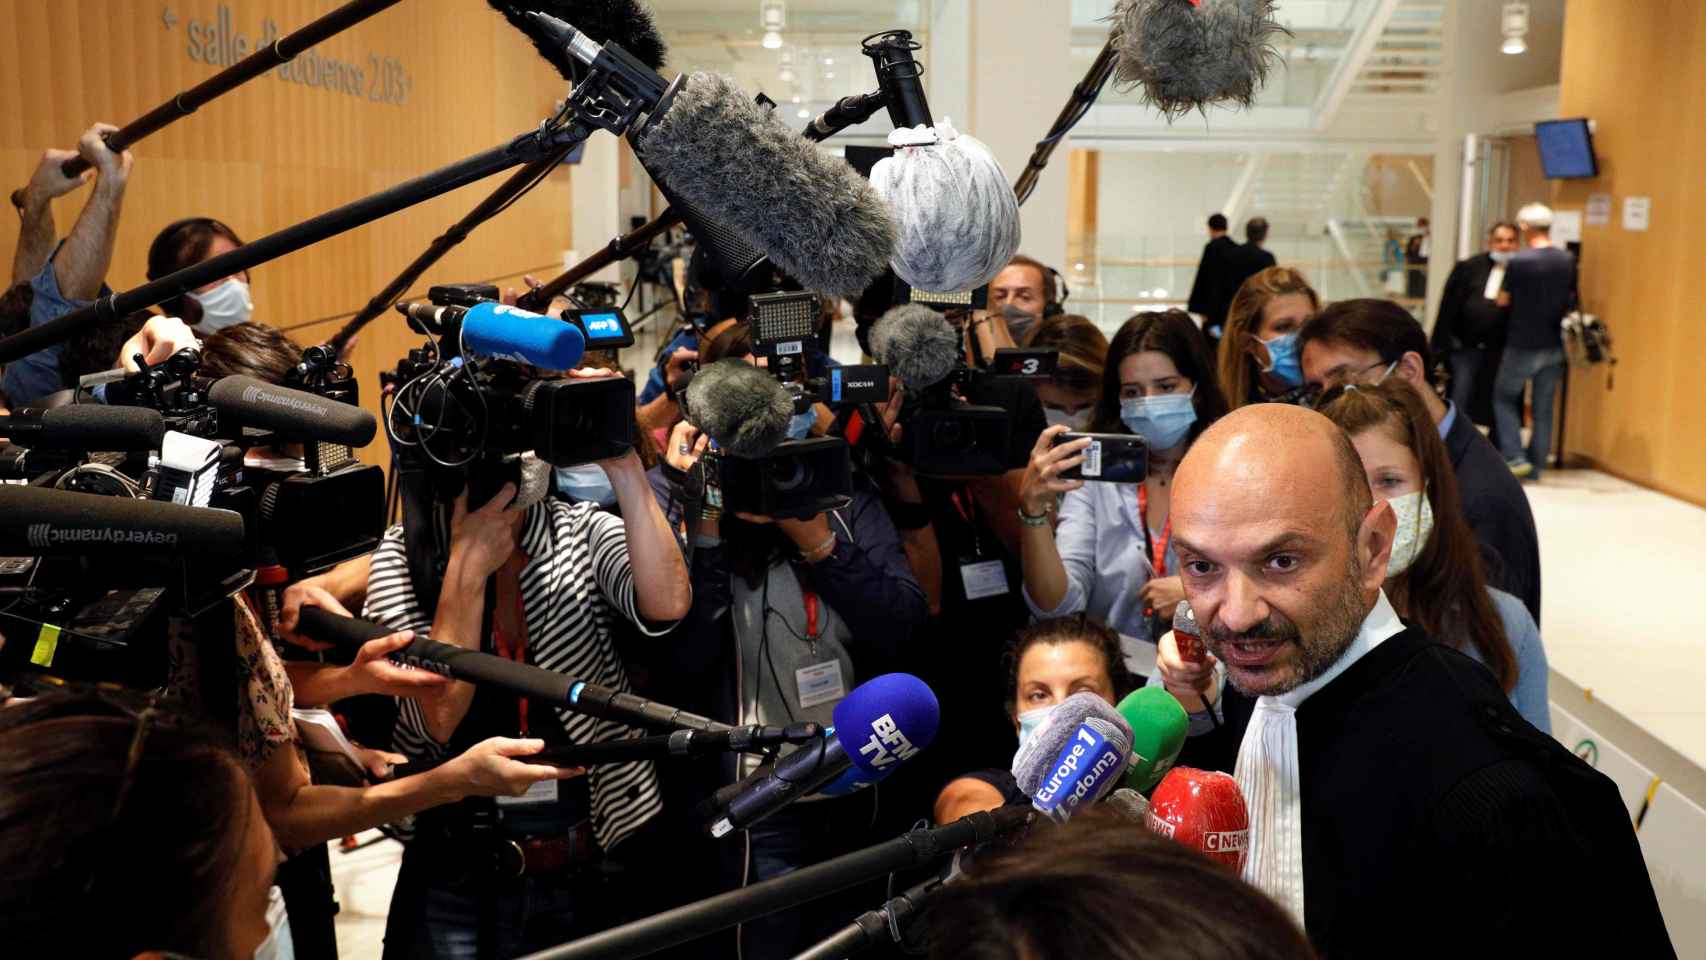 Richard Malka speaks to the press during the trial for the 2015 attacks. Paris, September 9, 2020. Photo: Geoffroy Van Der Hasselt/AFP/dpa